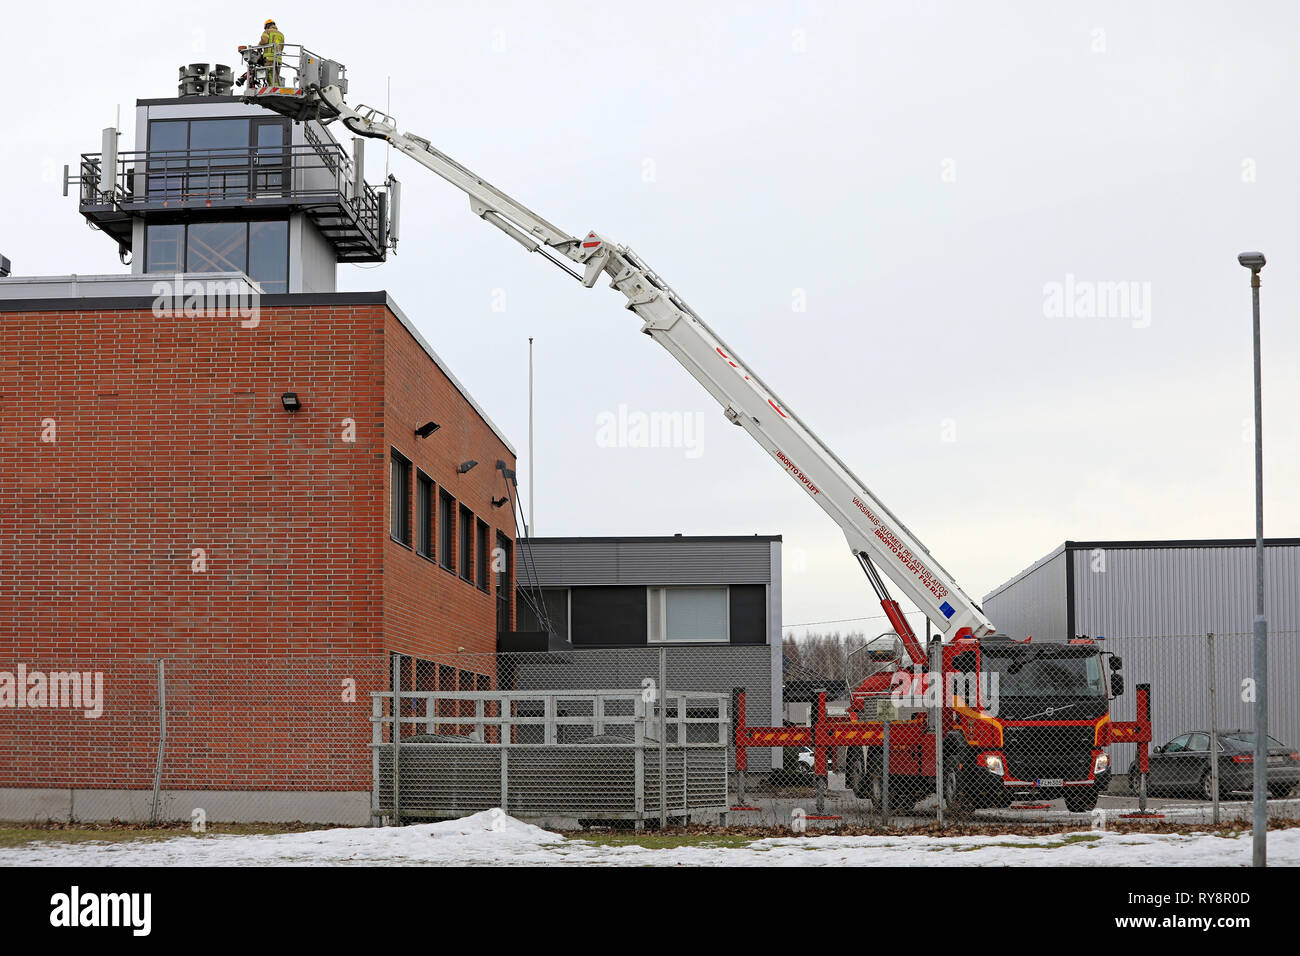 Salo, Finland - March 3, 2019: Fireman operating Volvo FE fire truck mounted Bronto F42RLX Skylift aerial ladder platform in Salo, Finland. Stock Photo